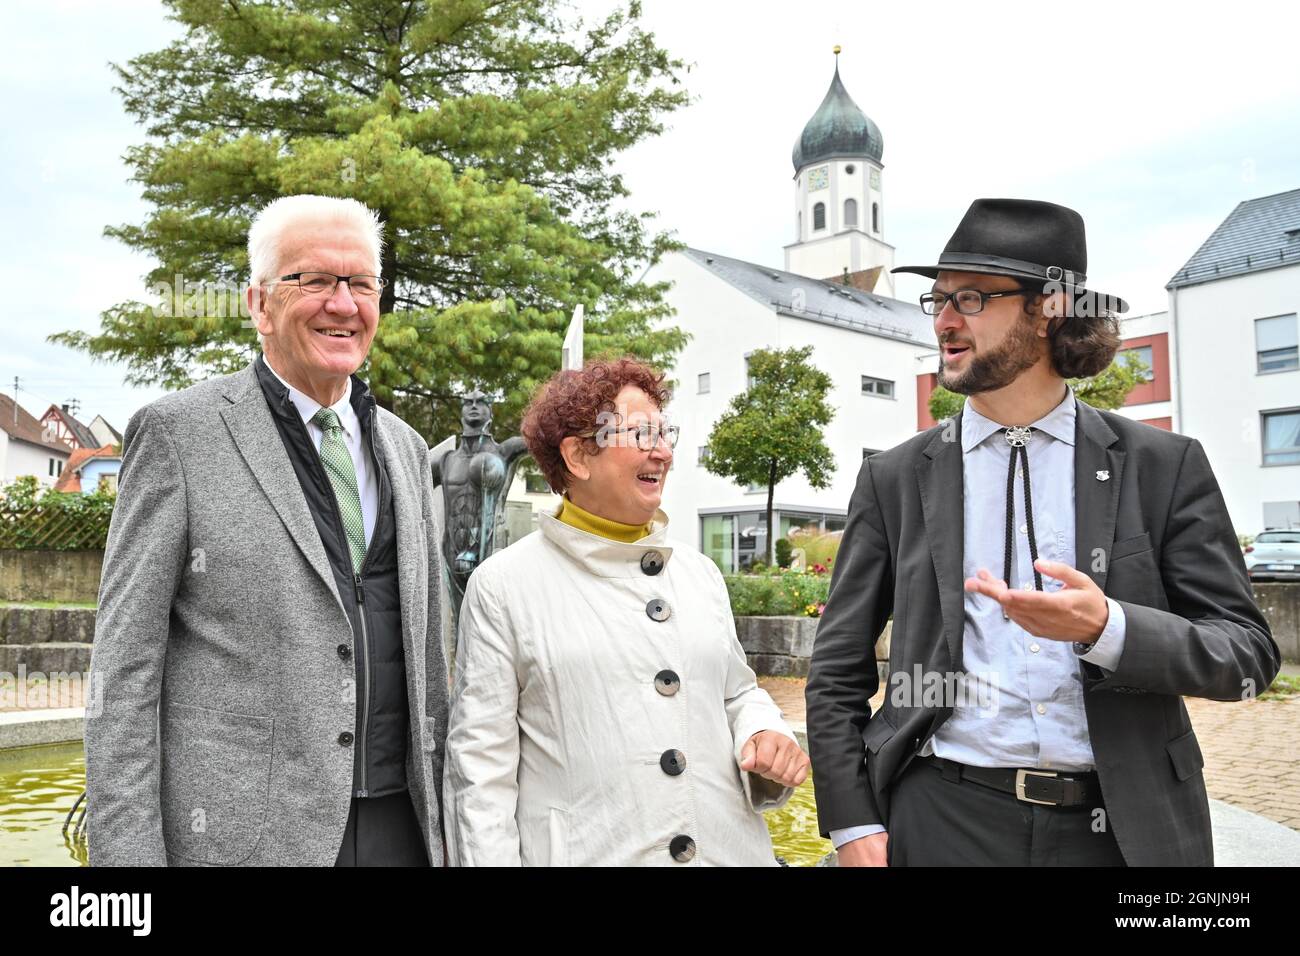 26 September 2021, Baden-Wuerttemberg, Laiz Bei Sigmaringen: Winfried Kretschmann (Bündnis 90/ Die Grünenl, l), Prime Minister of Baden-Württemberg, stands together with his wife Gerlinde and son Johannes Kretschmann (Bündnis 90/ Die Grünenl), who is running for the Bundestag elections, on the town hall square for a family photo. Photo: Felix Kästle/dpa Stock Photo